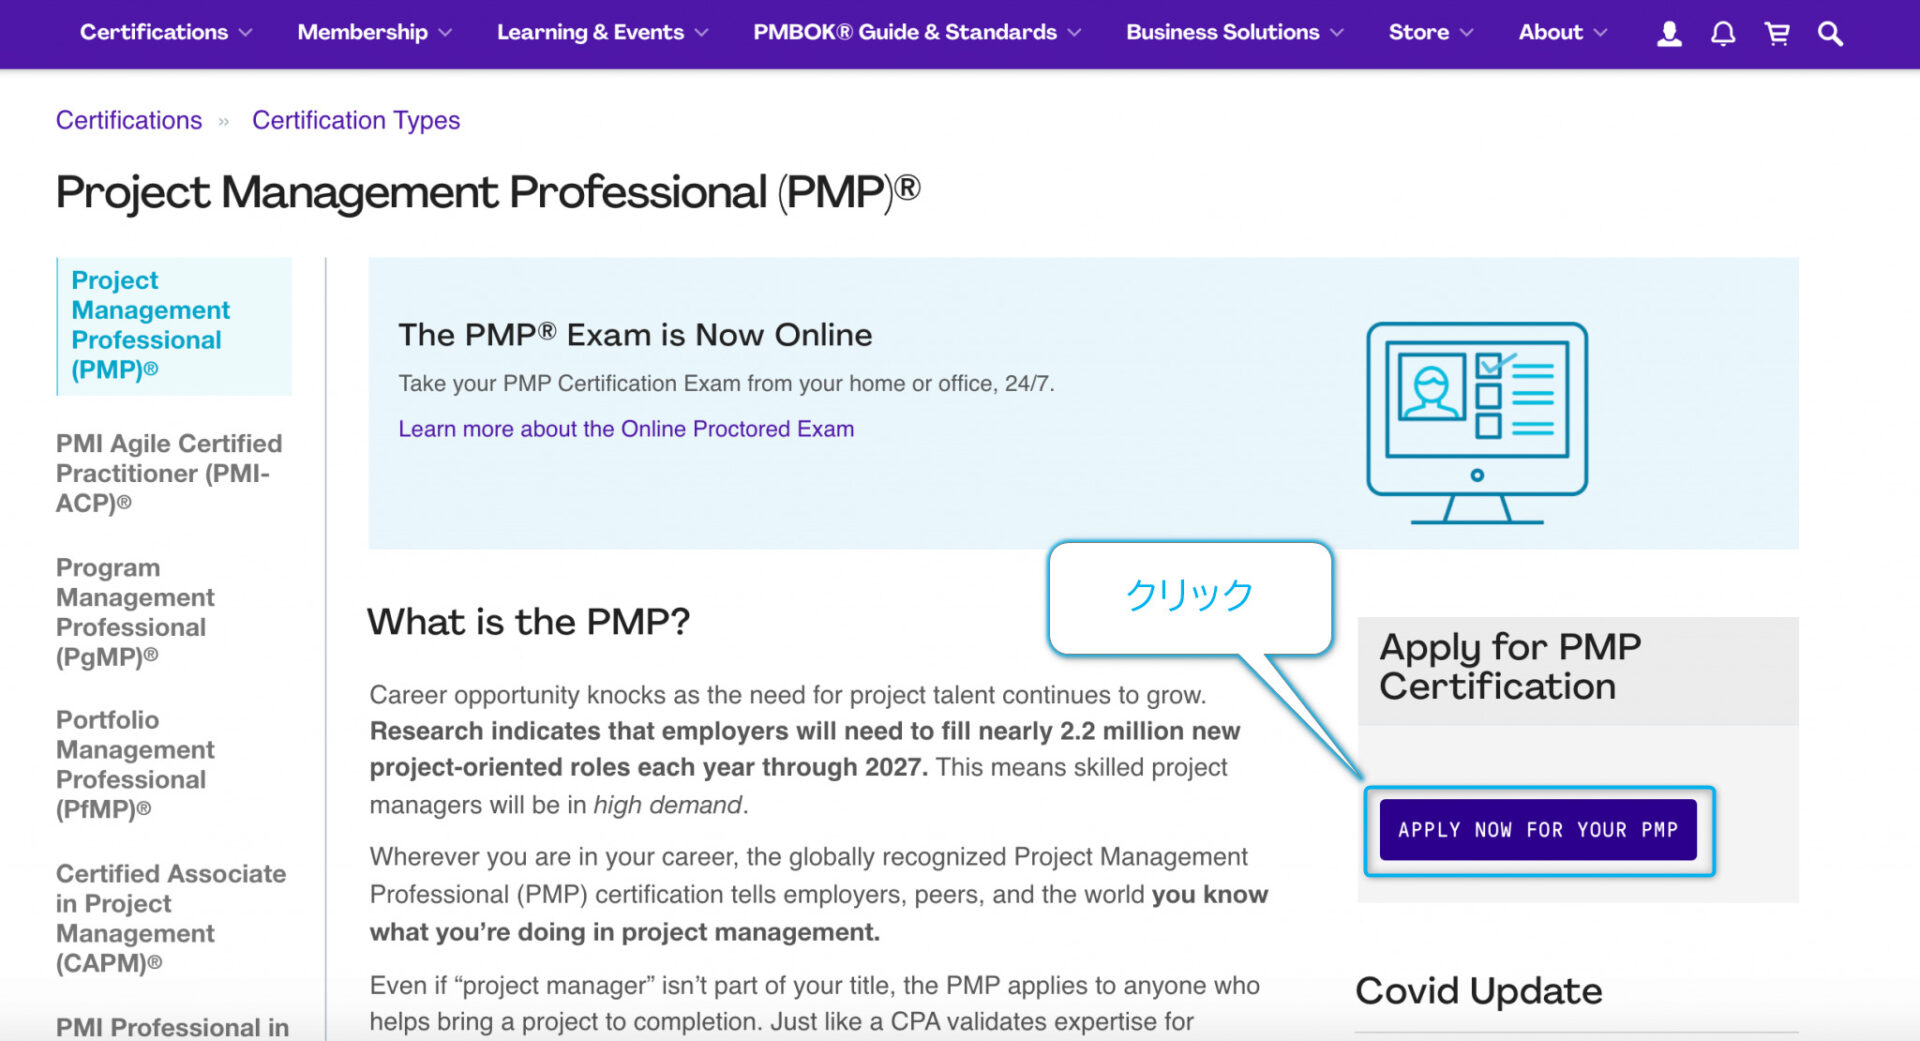 Apply-for-PMP-Certification